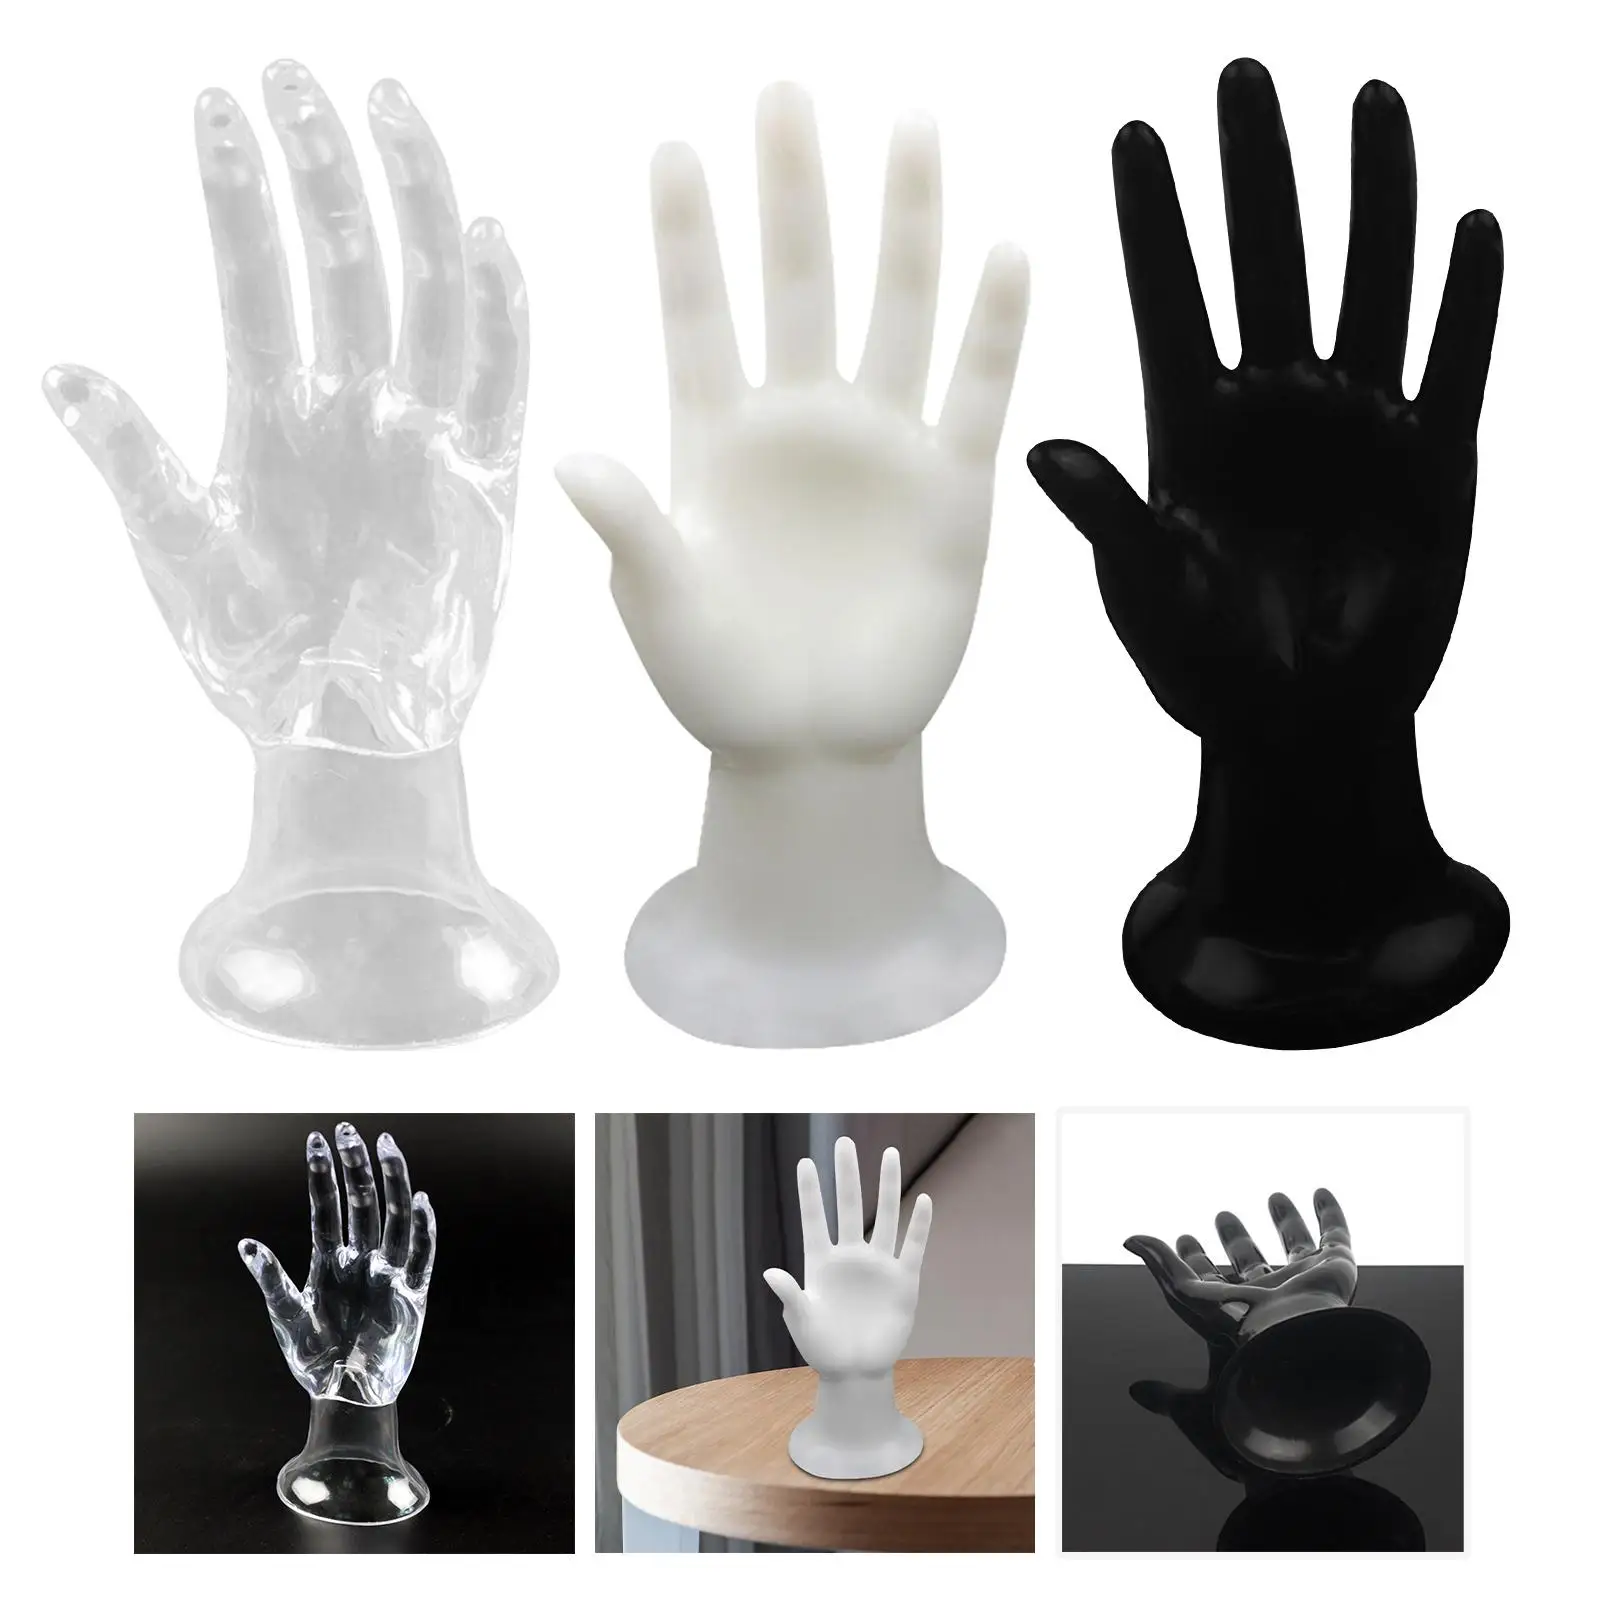 Mannequin Hand Jewelry Display Holder Tower for Bangle Shop Home Decor Hand Form